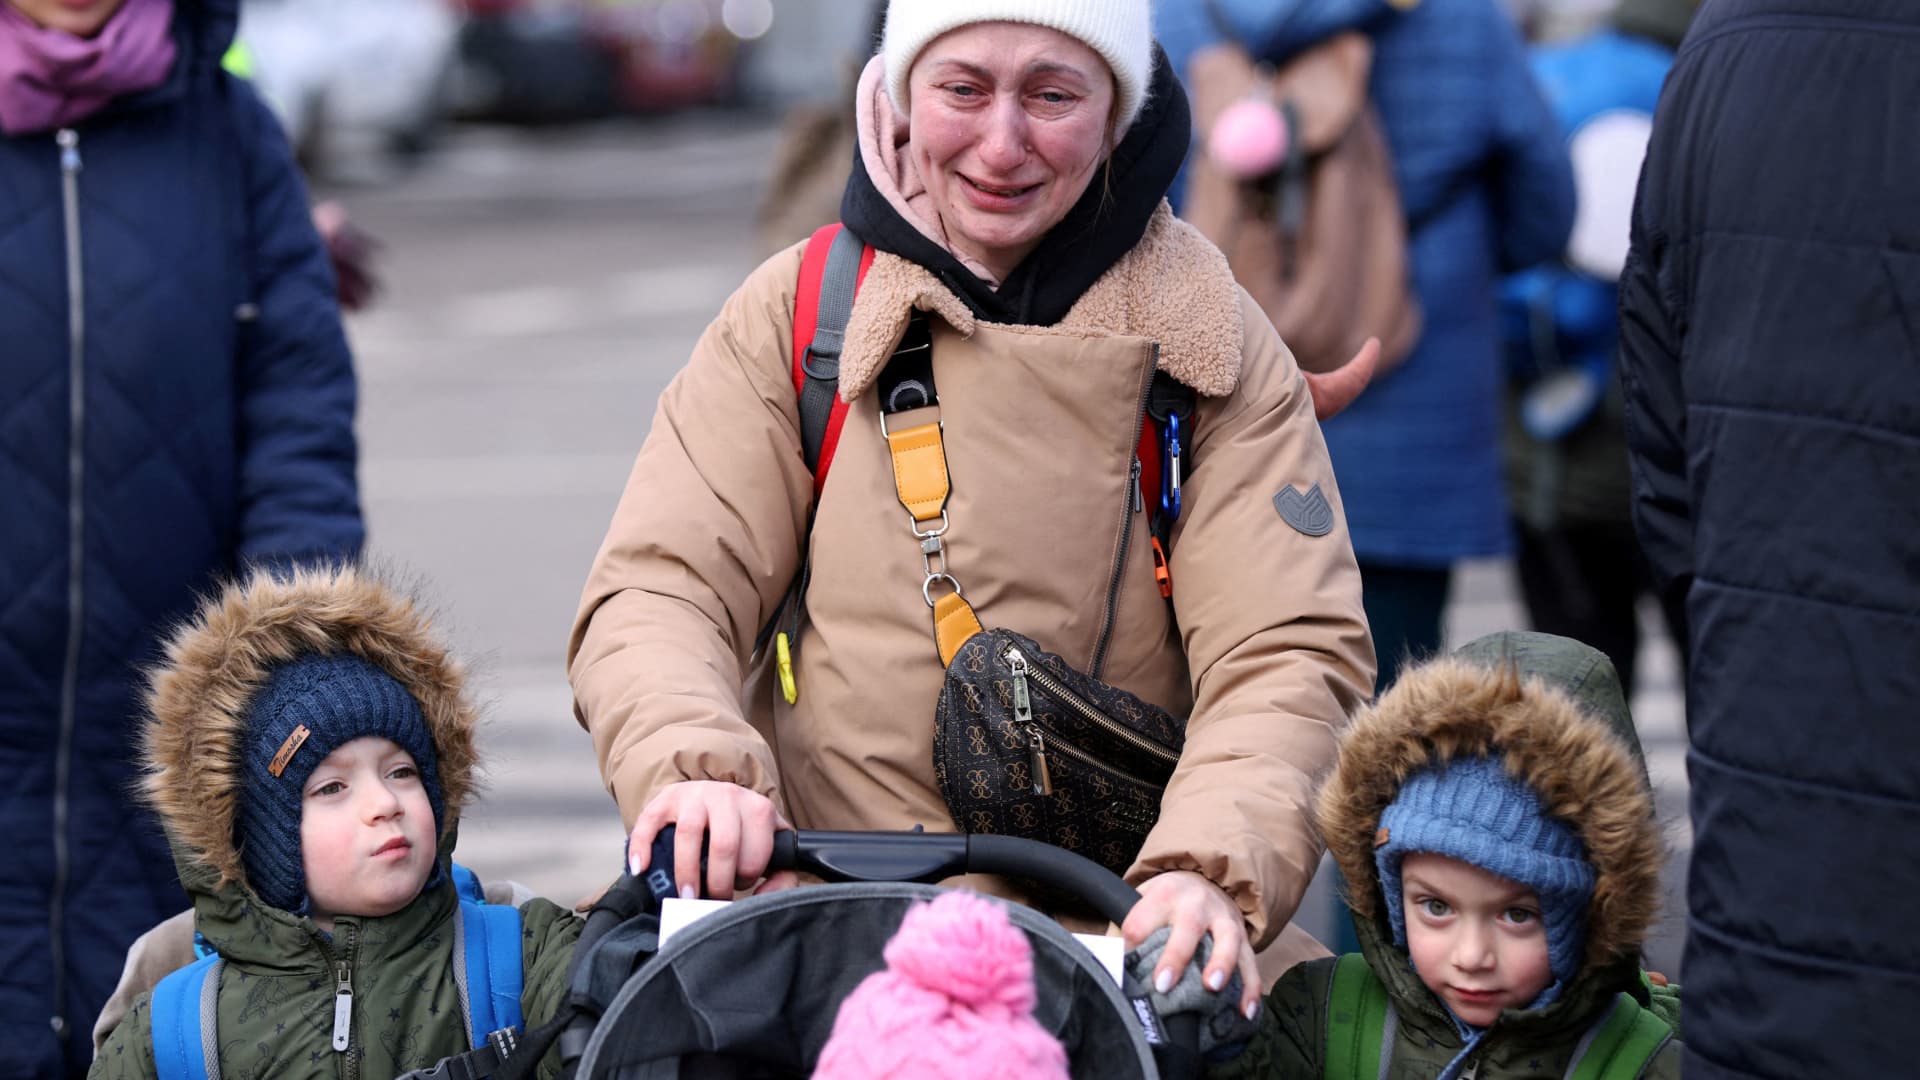 A woman cries next to her children after fleeing from Russia's invasion of Ukraine, at the border crossing in Siret, Romania, February 28, 2022.